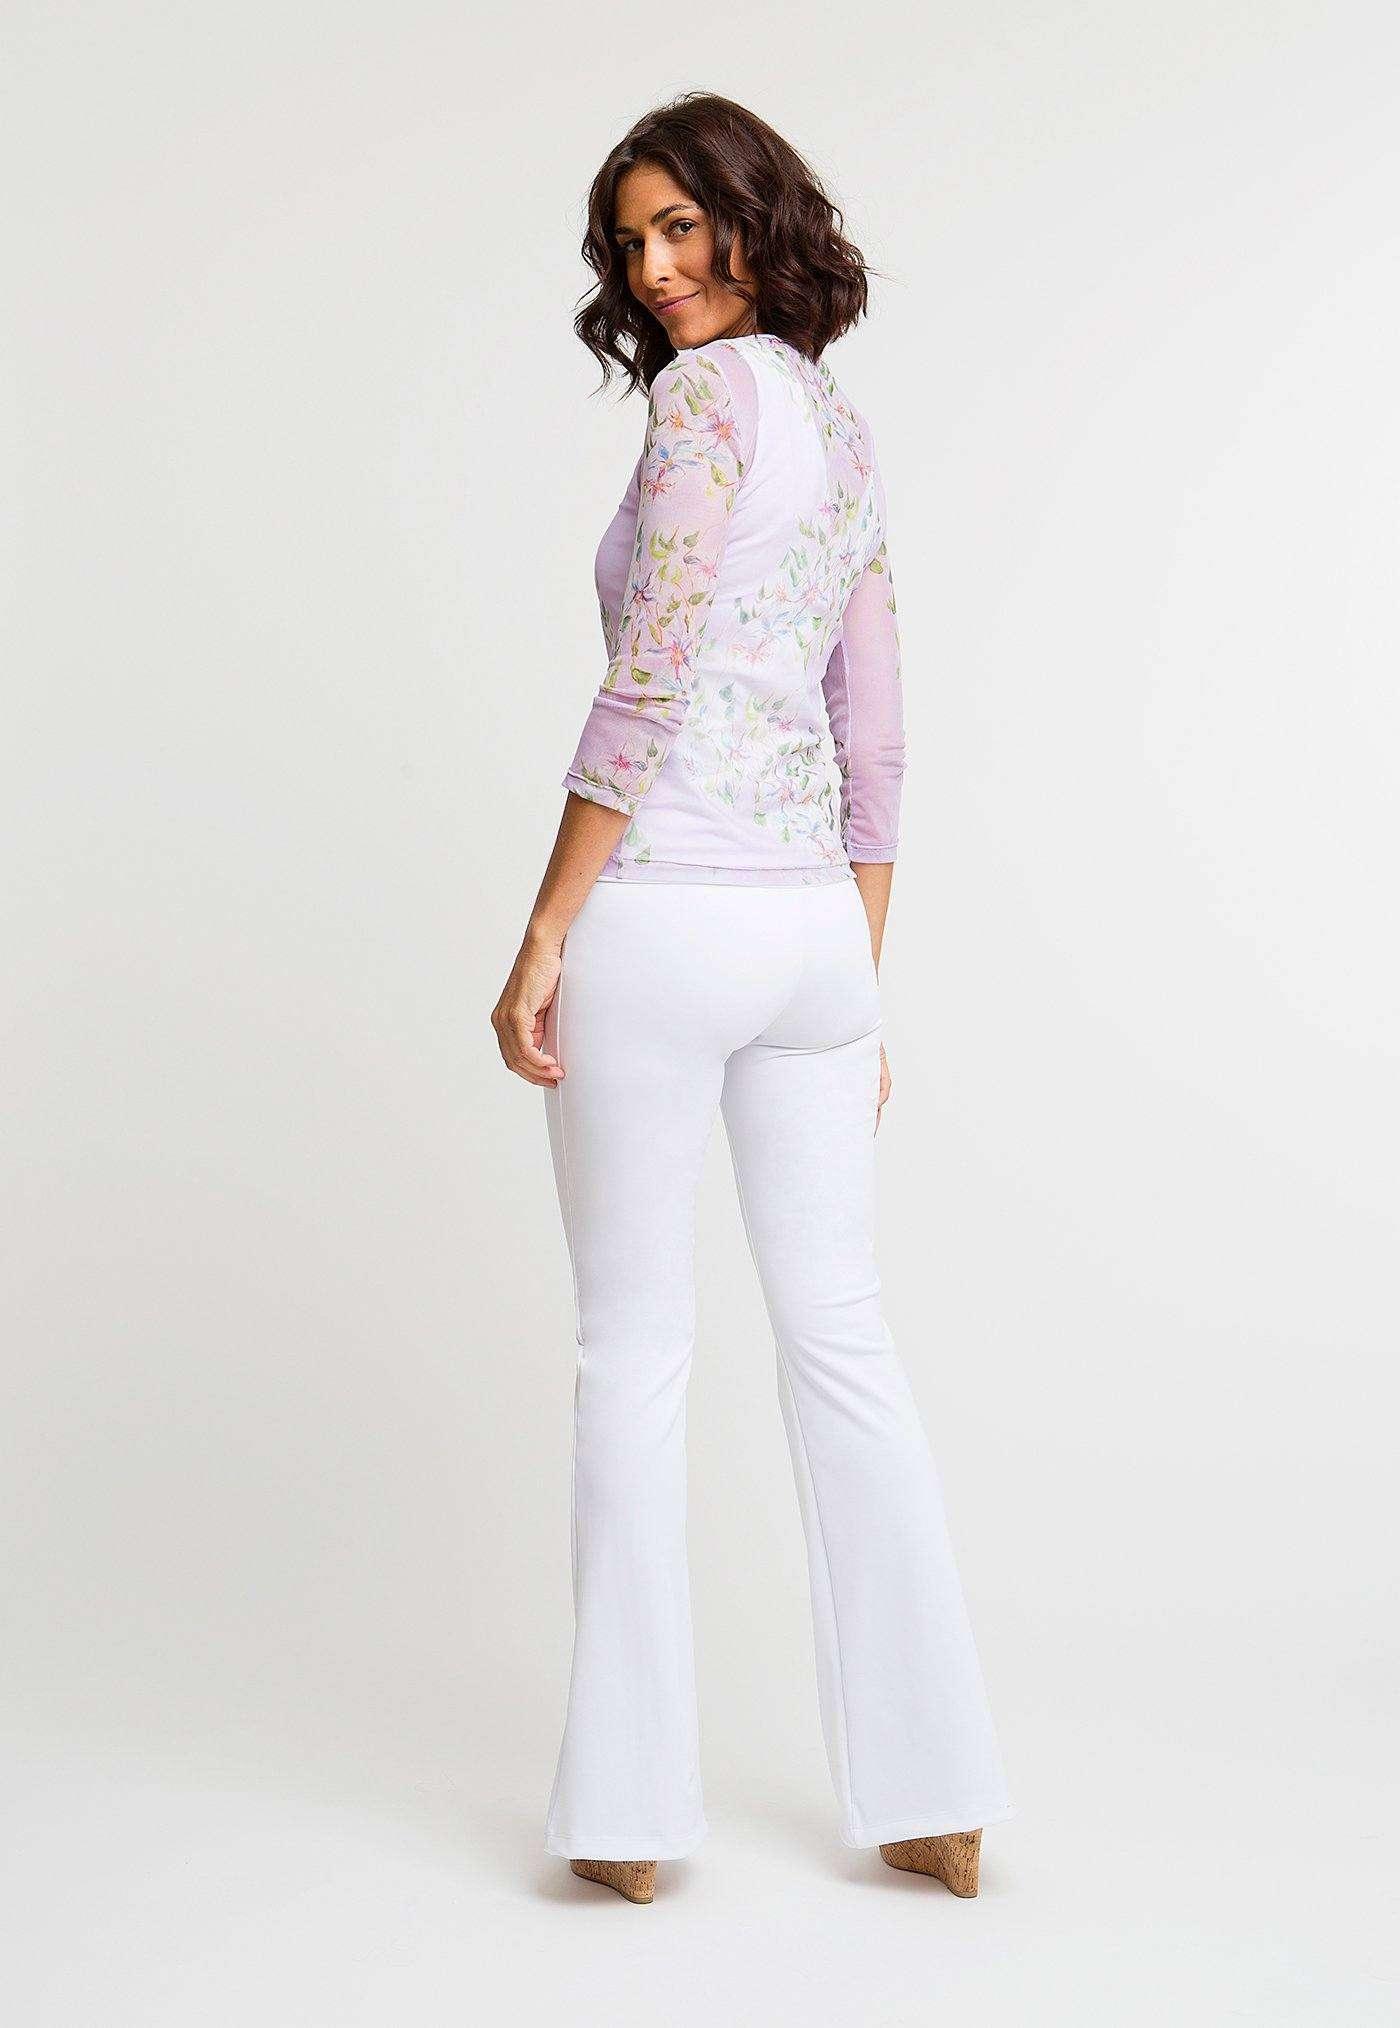 lavender flower printed mesh t shirt with white stretch knit tank top and white stretch knit pants